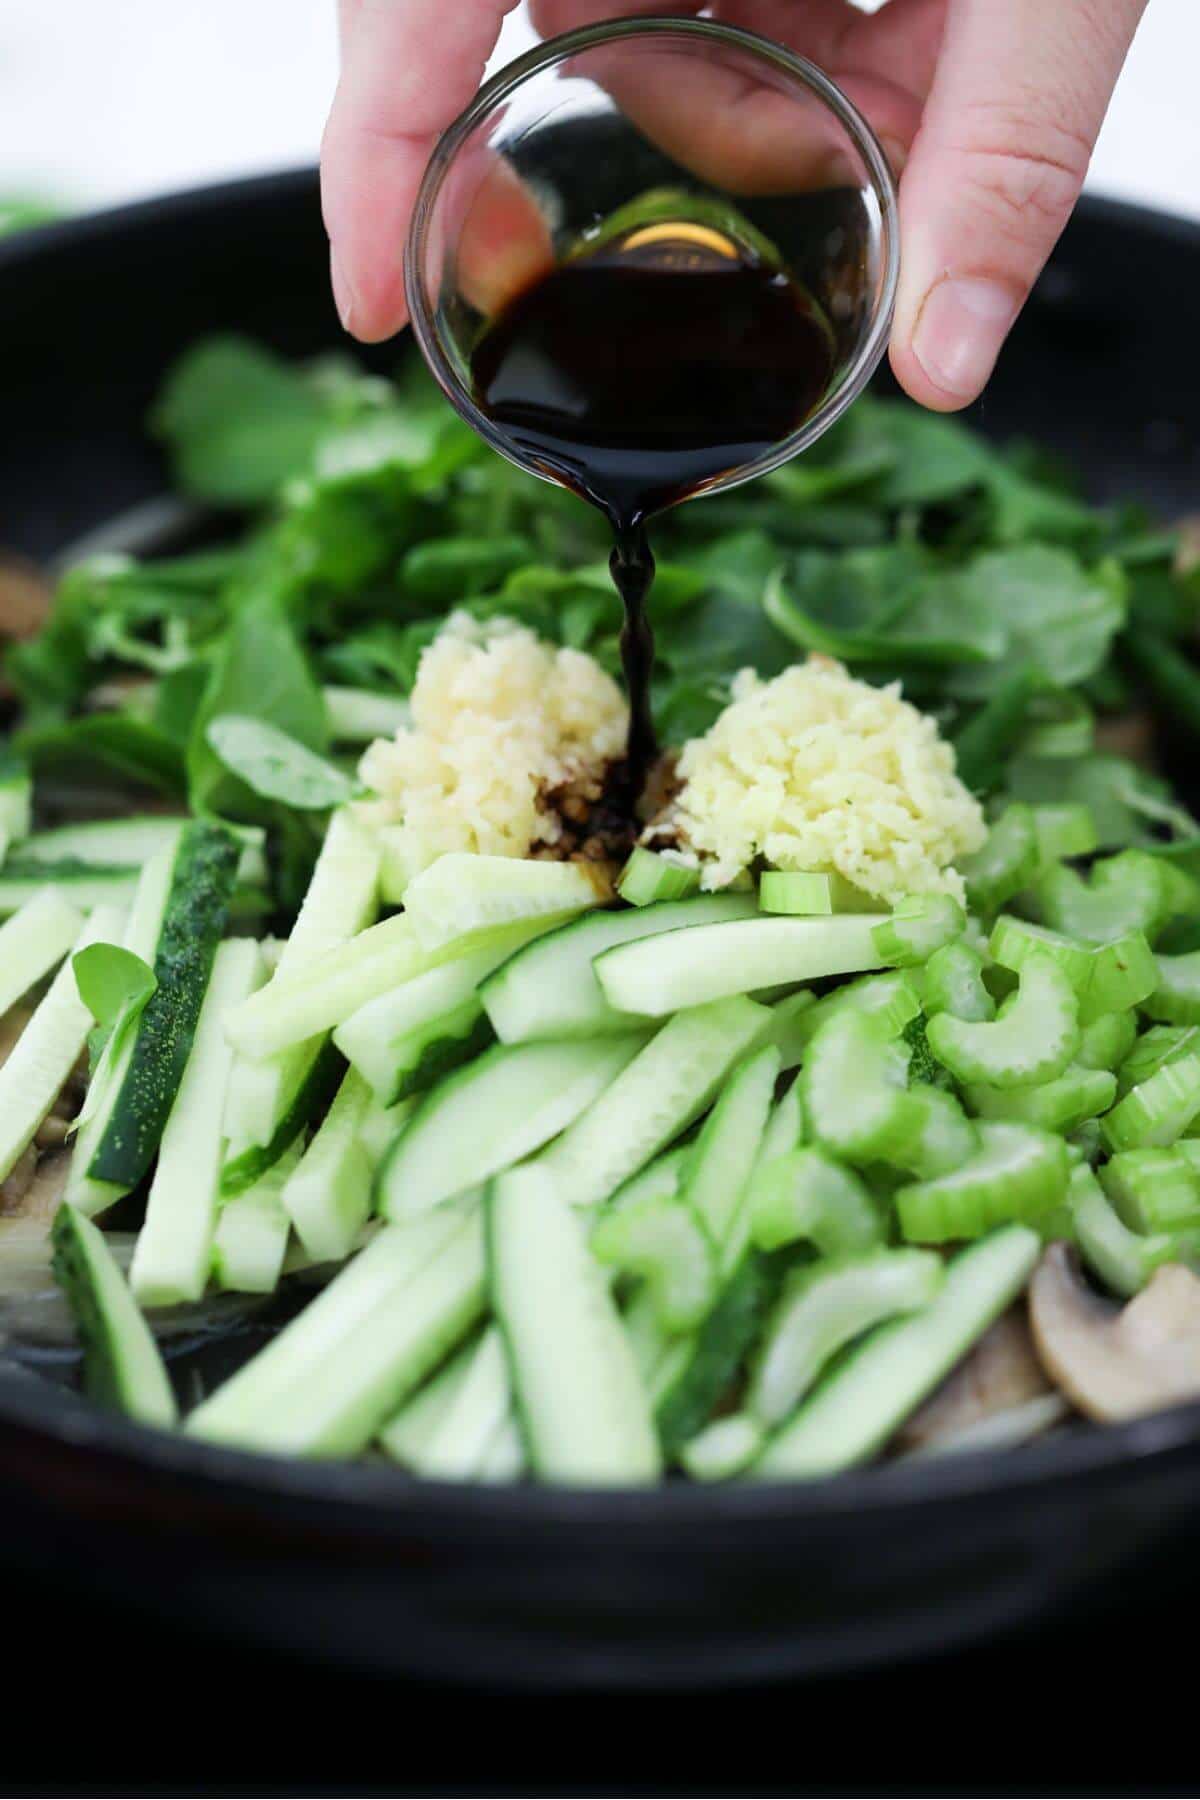 A person pouring soy sauce over vegetables in a pan.